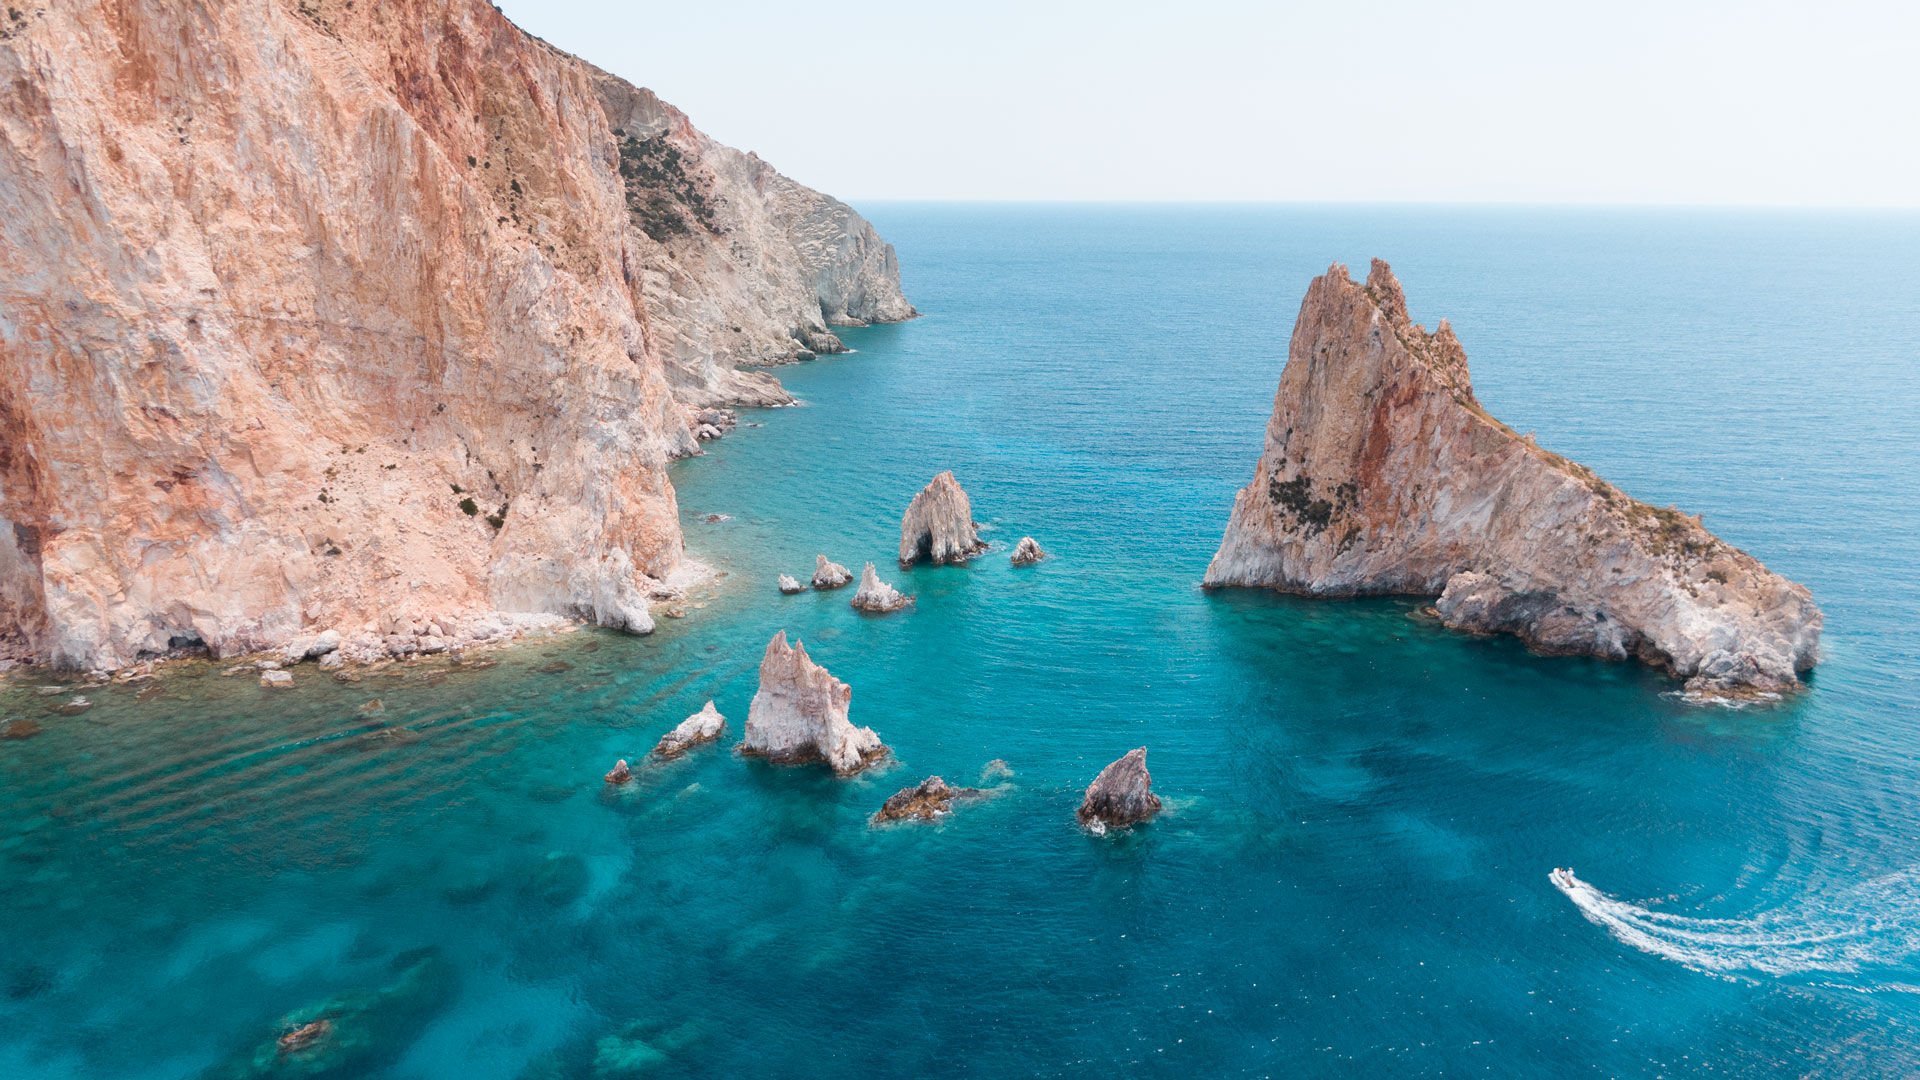 Polyegos, not just a virgin landscape of pristine beaches, but an escape for rare and protected wildlife, just off Milos